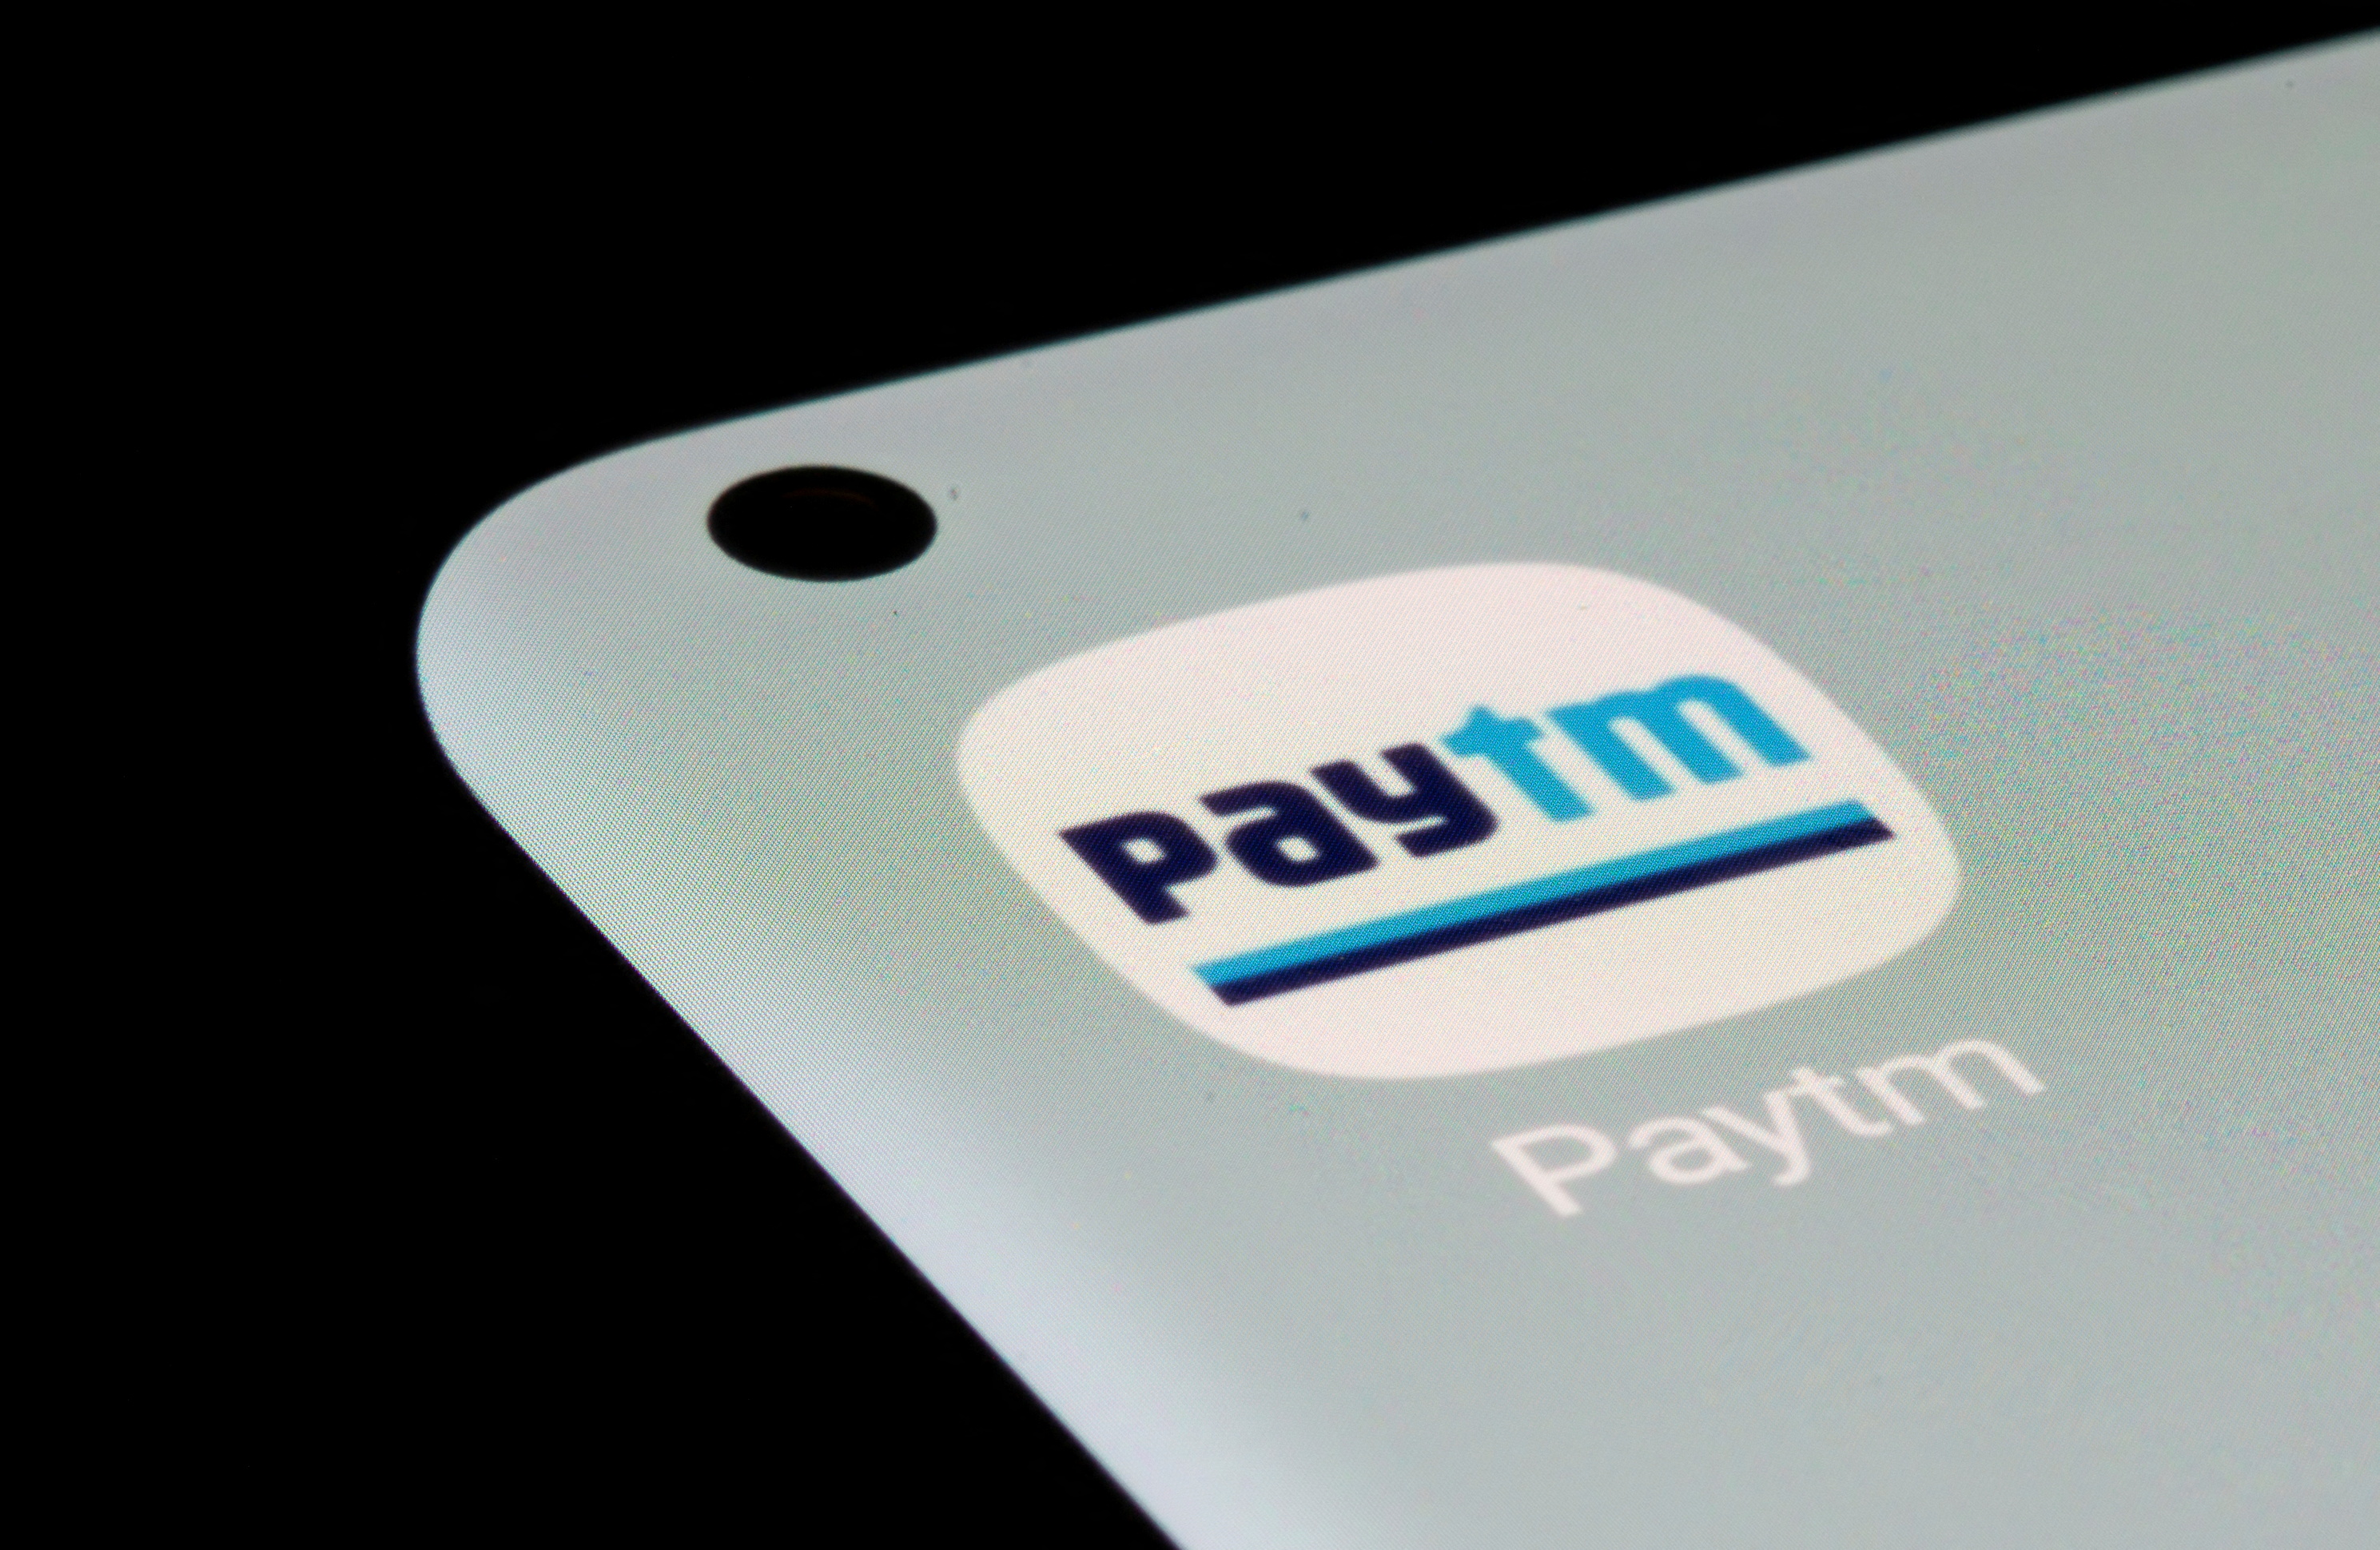 Paytm app is seen on a smartphone in this illustration